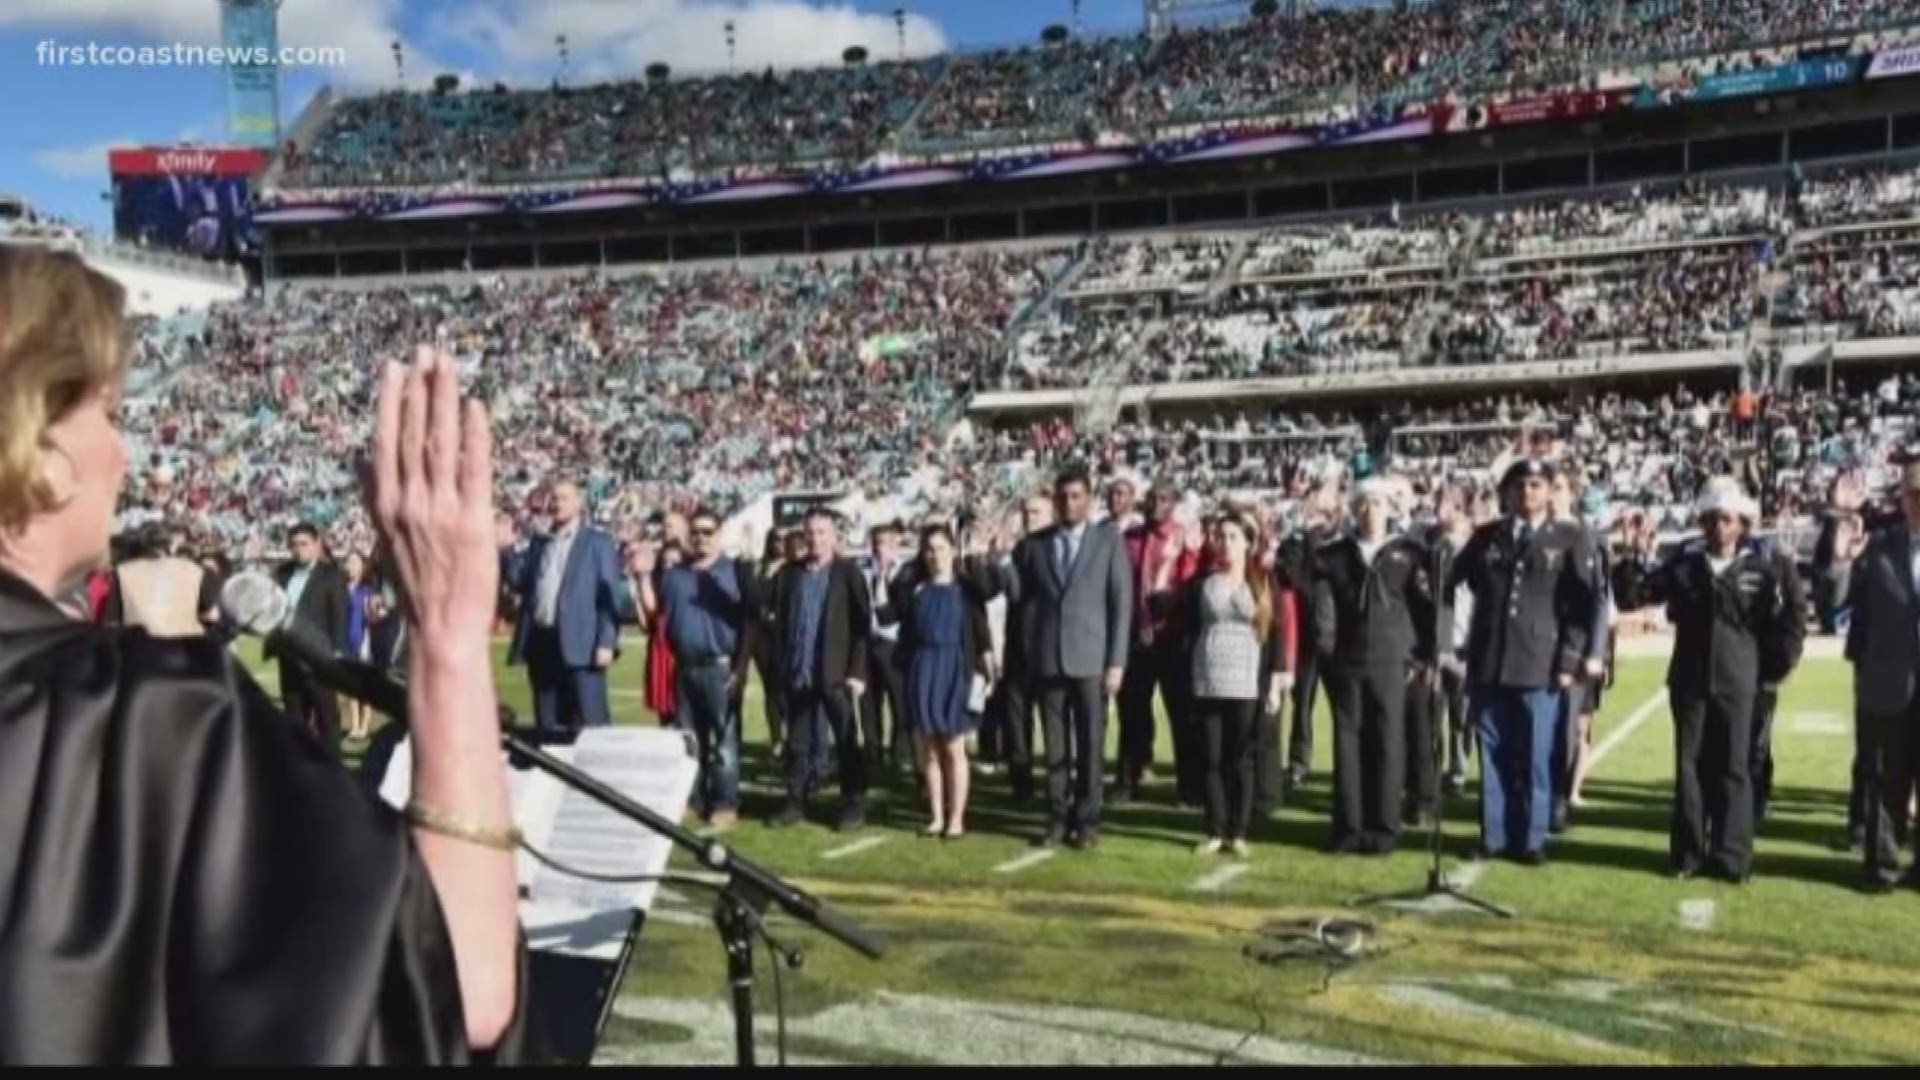 65 people from almost 40 countries became citizens during the Sunday's Jaguars vs Redskins game.